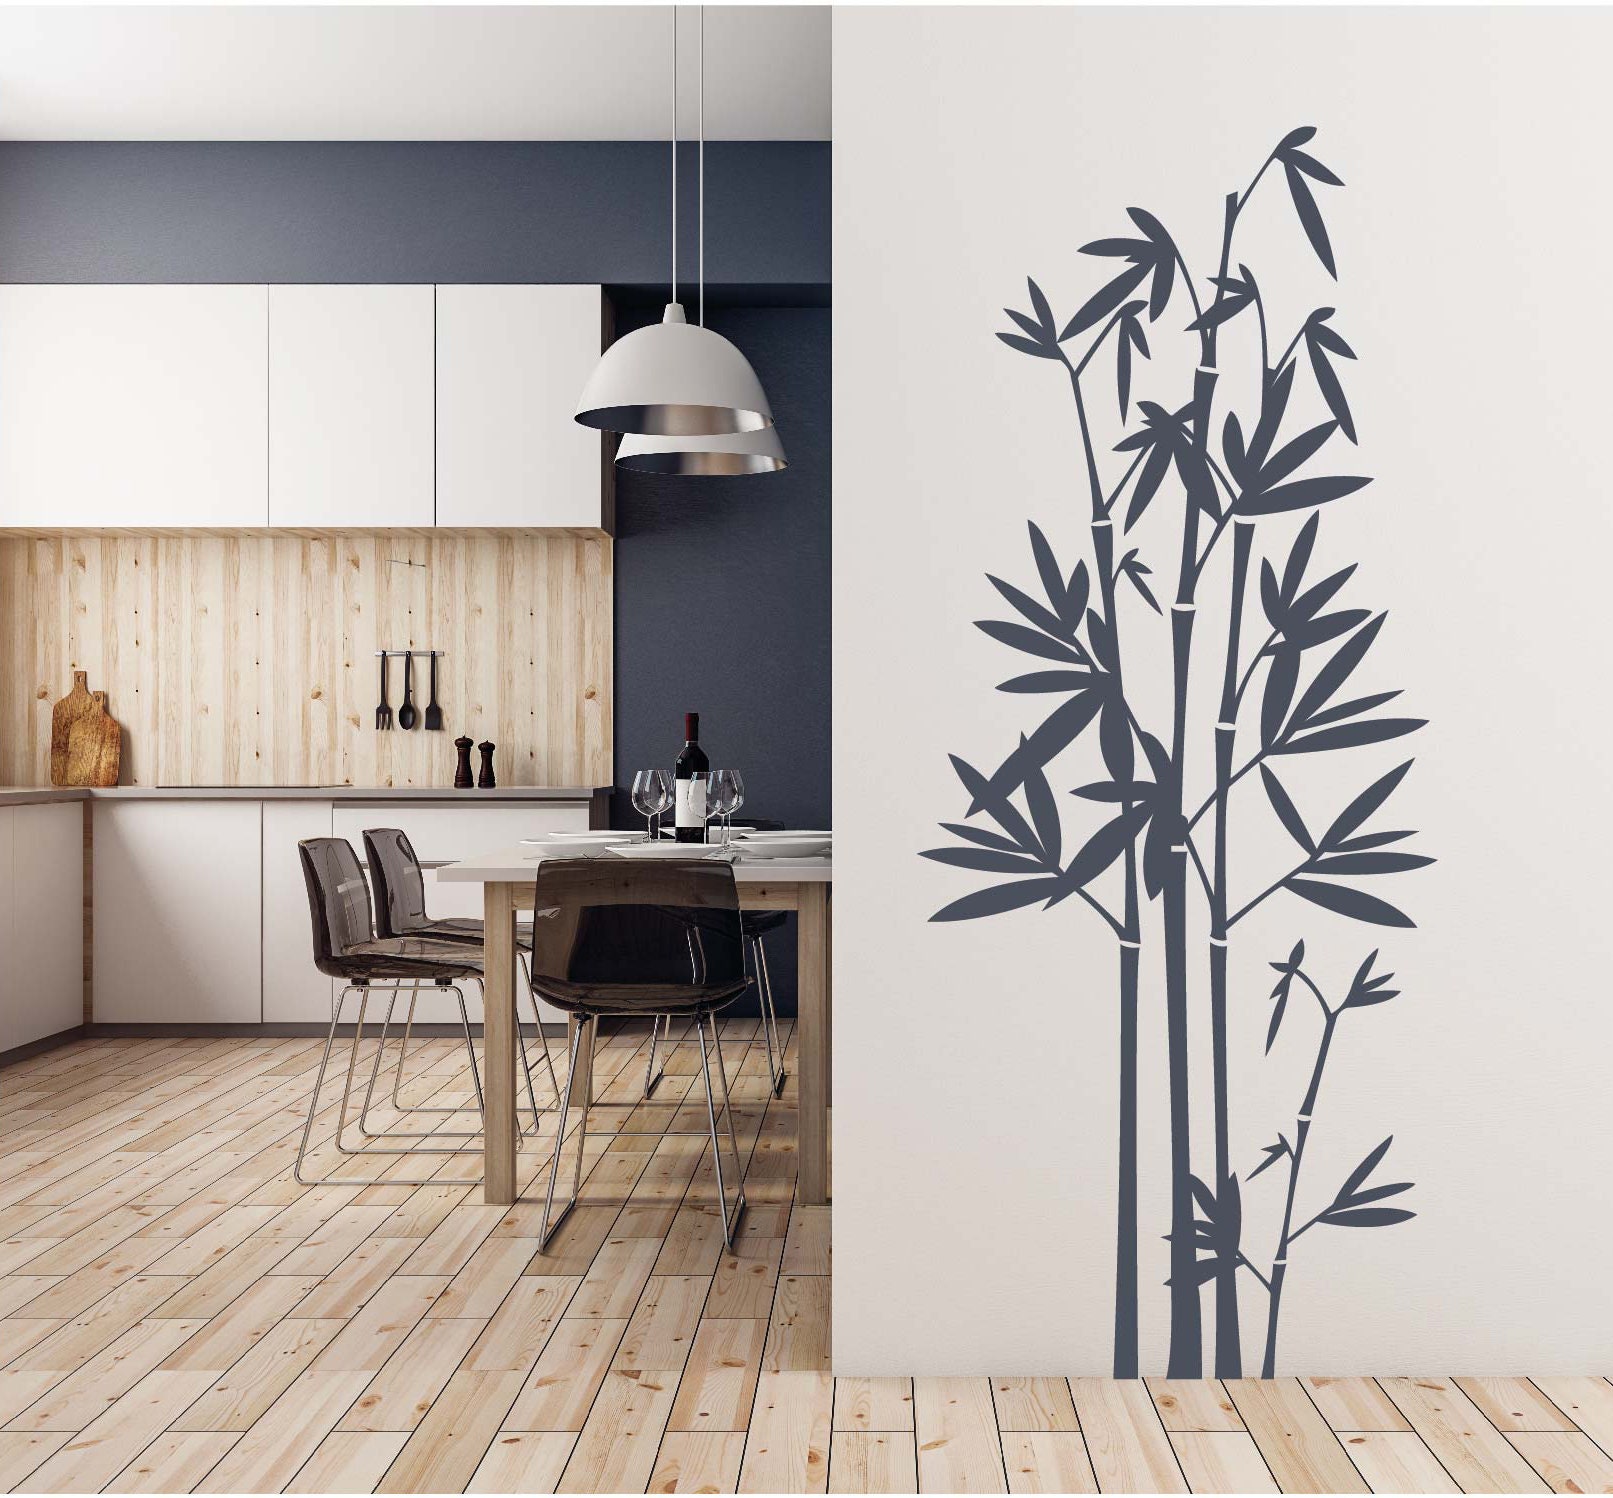 Stickers Bambou - Autocollant muraux bambou deco nature